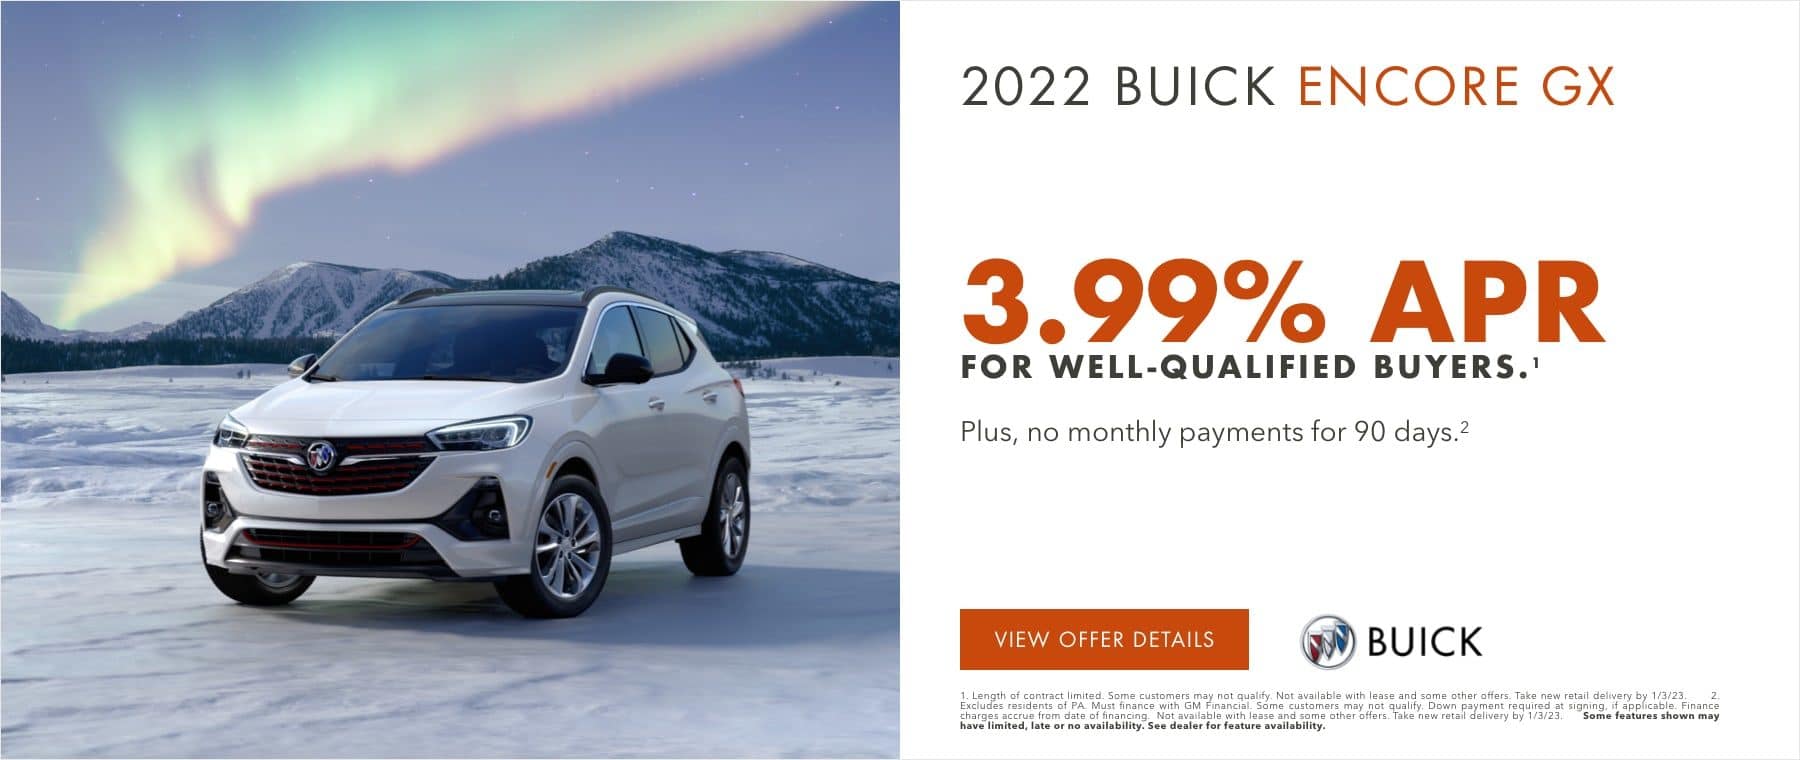 3.99% APR for well-qualified buyers.1 PLUS, NO MONTHLY PAYMENTS FOR 90 DAYS.2